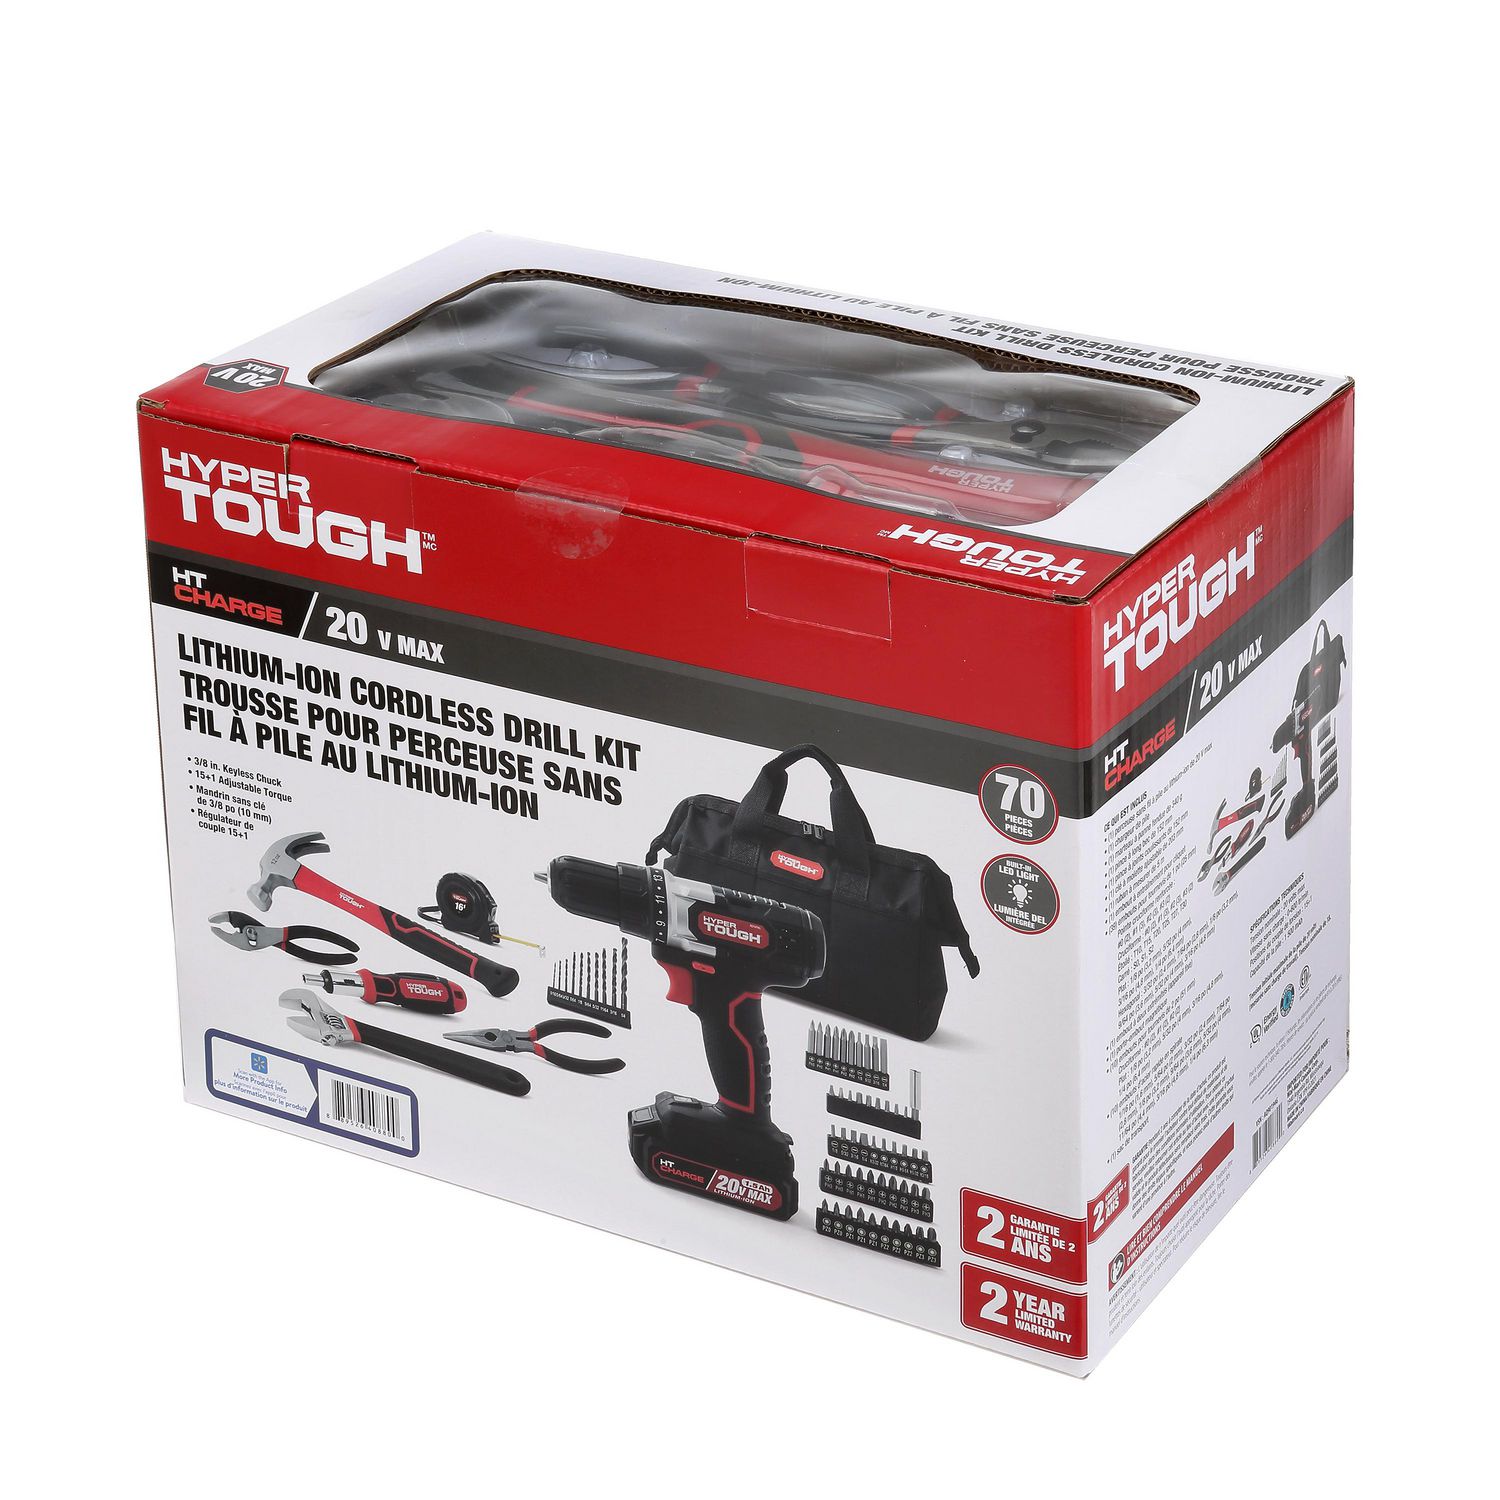 HYPER TOUGH 70-PIECE 20V MAX LITHIUM-ION PROJECT KIT, Rated Voltage: 20V  MAX